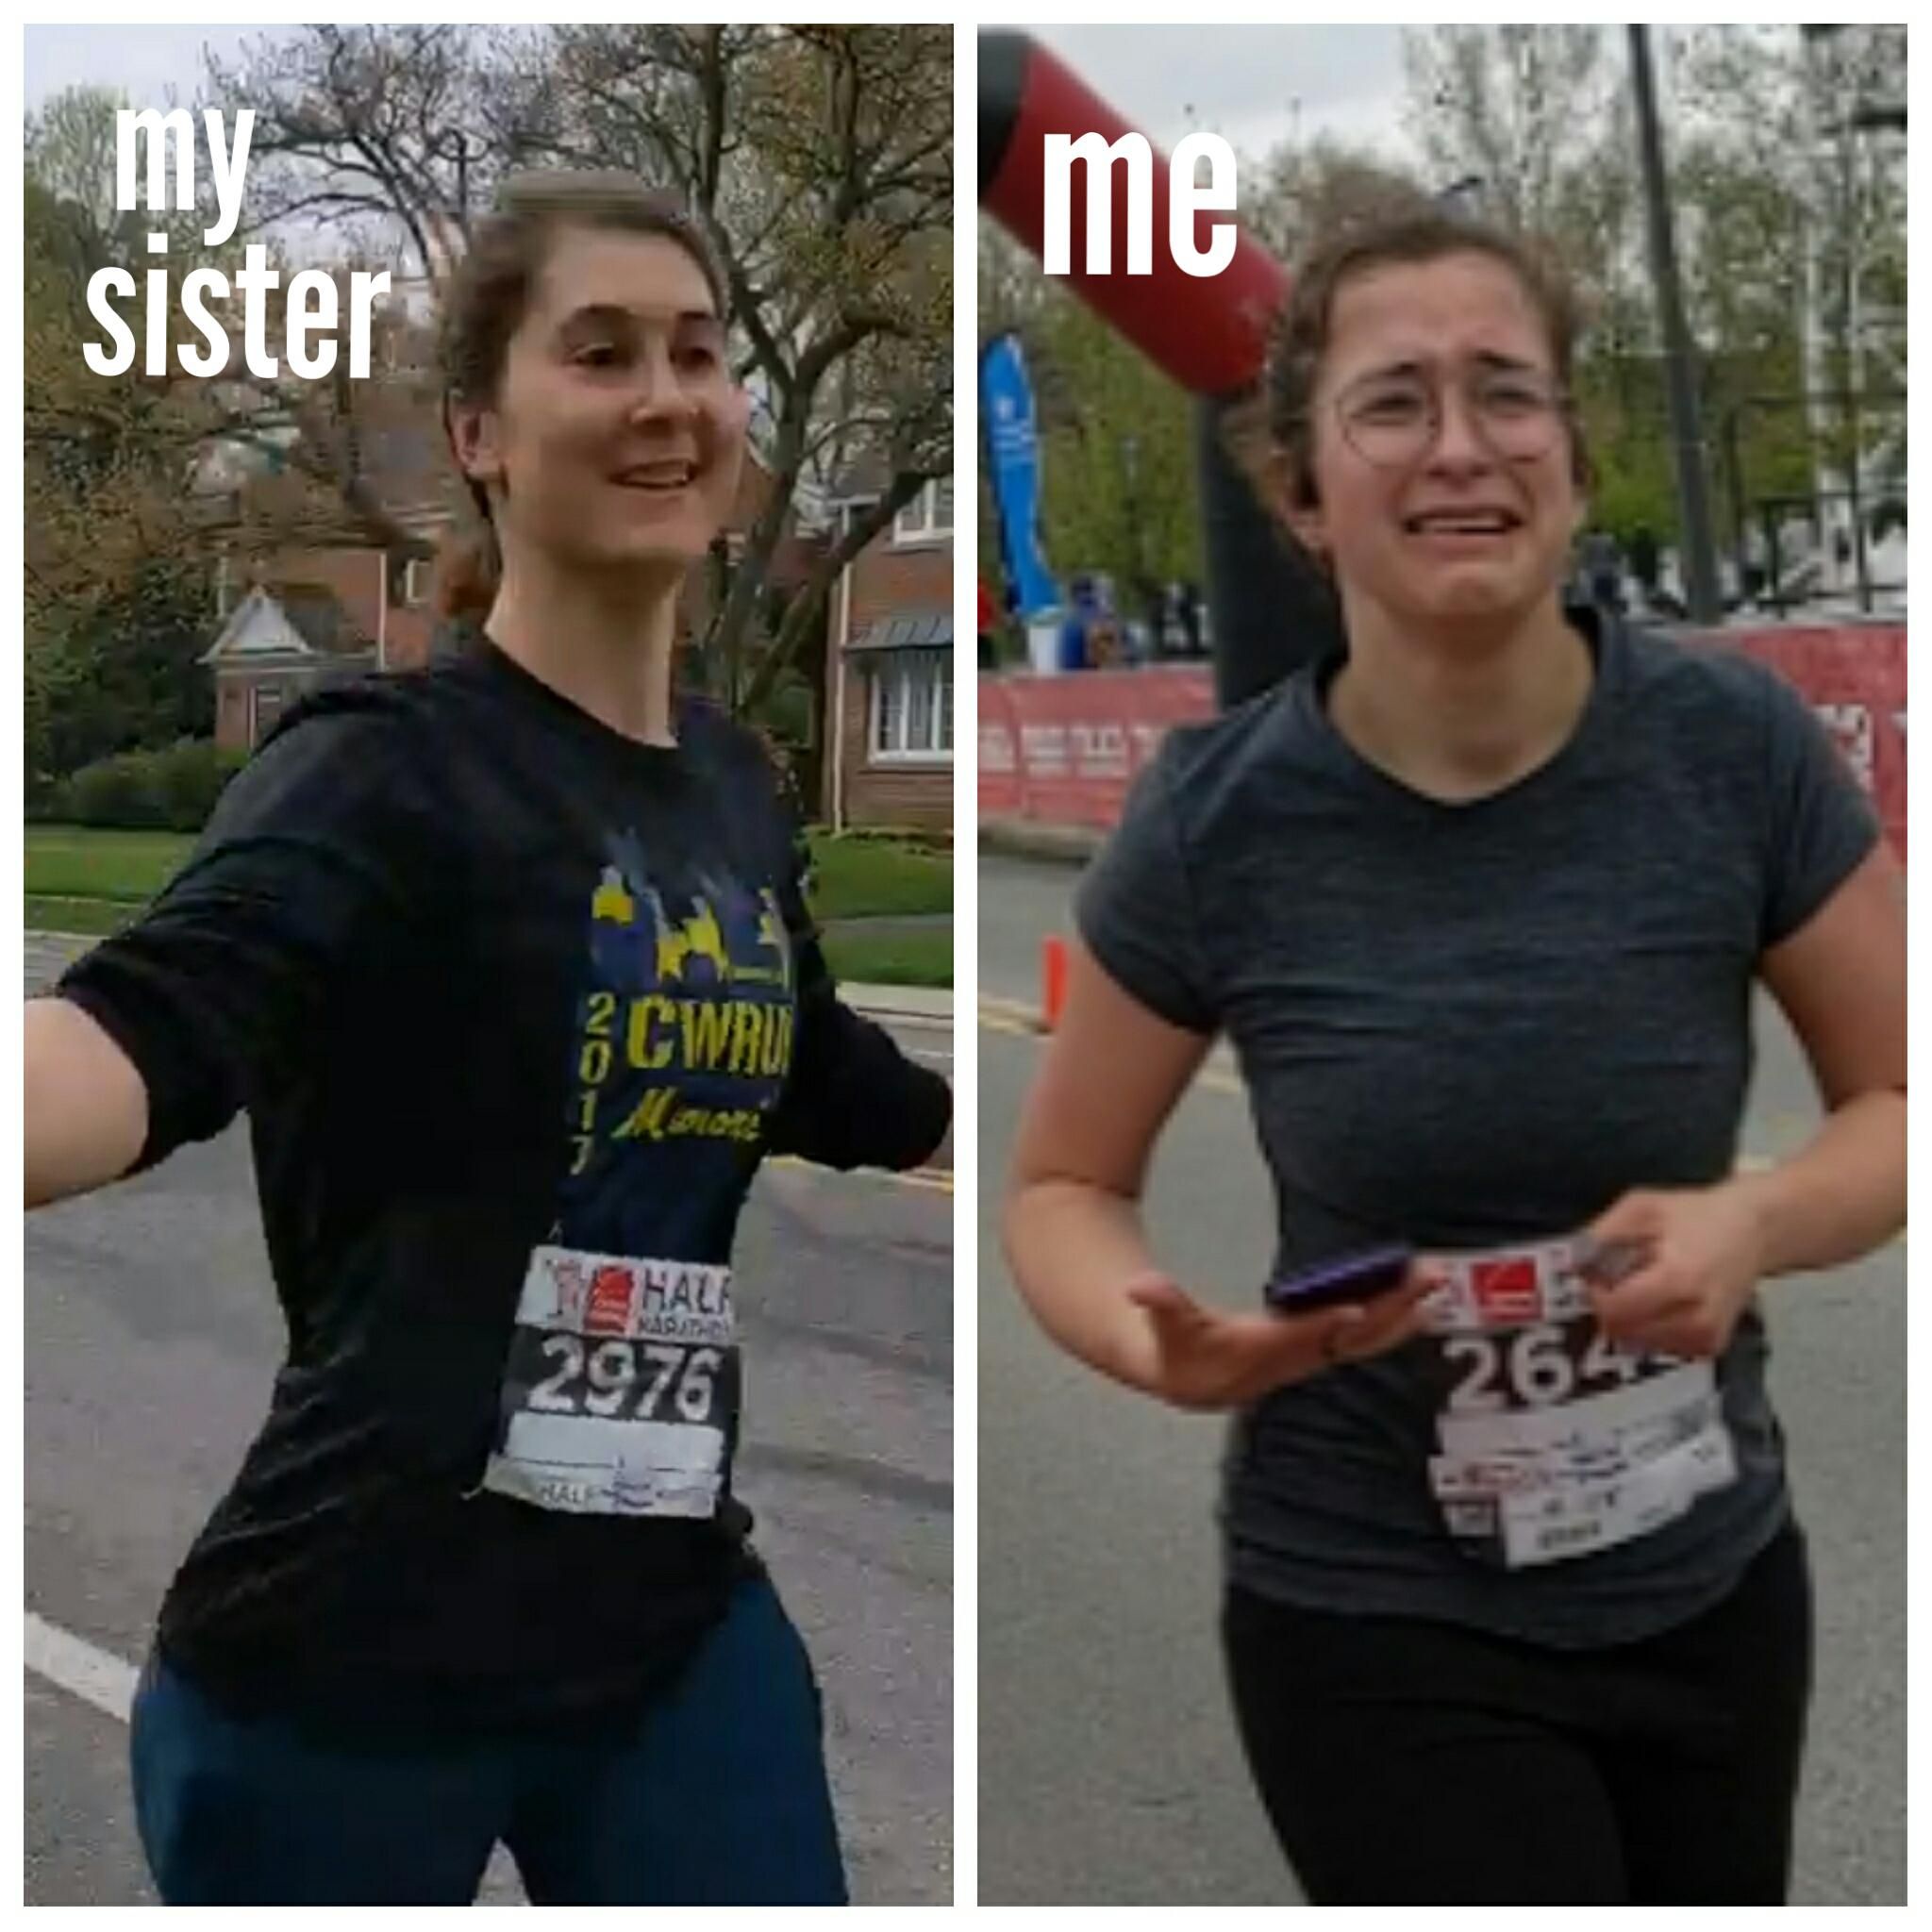 My sister: "You can do the half-marathon with me! Trust me, it's not that bad." ...